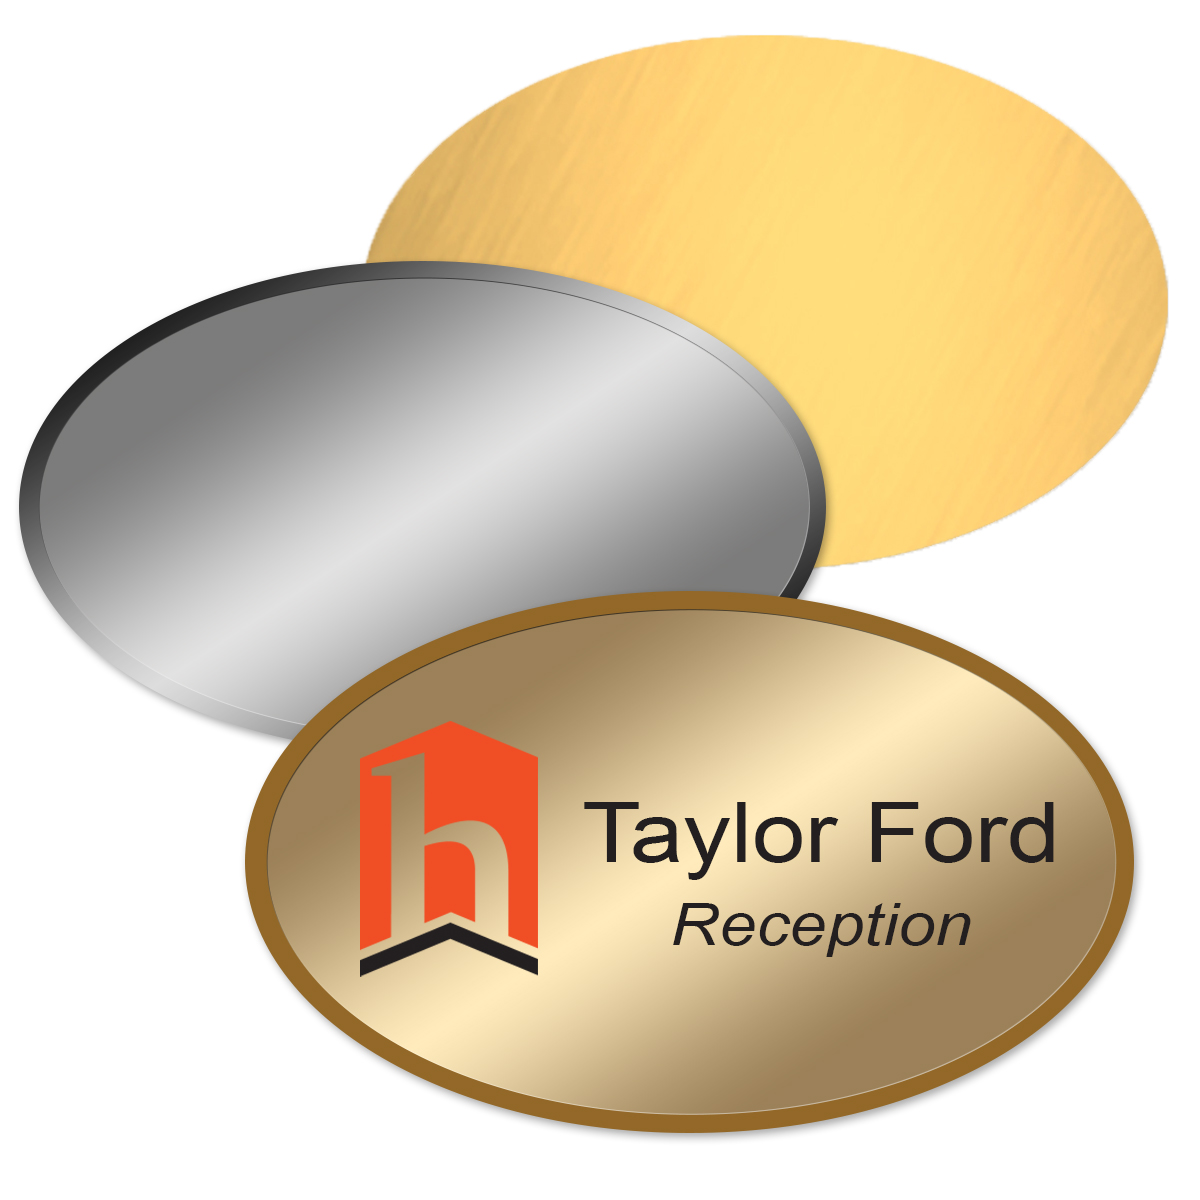 Personalized Metal Name Tags with Logo, Oval Shape, White, Color, Gloss  Finish (Fastener Type: Magnetic Fastener, Fastener Attachment: Attached)